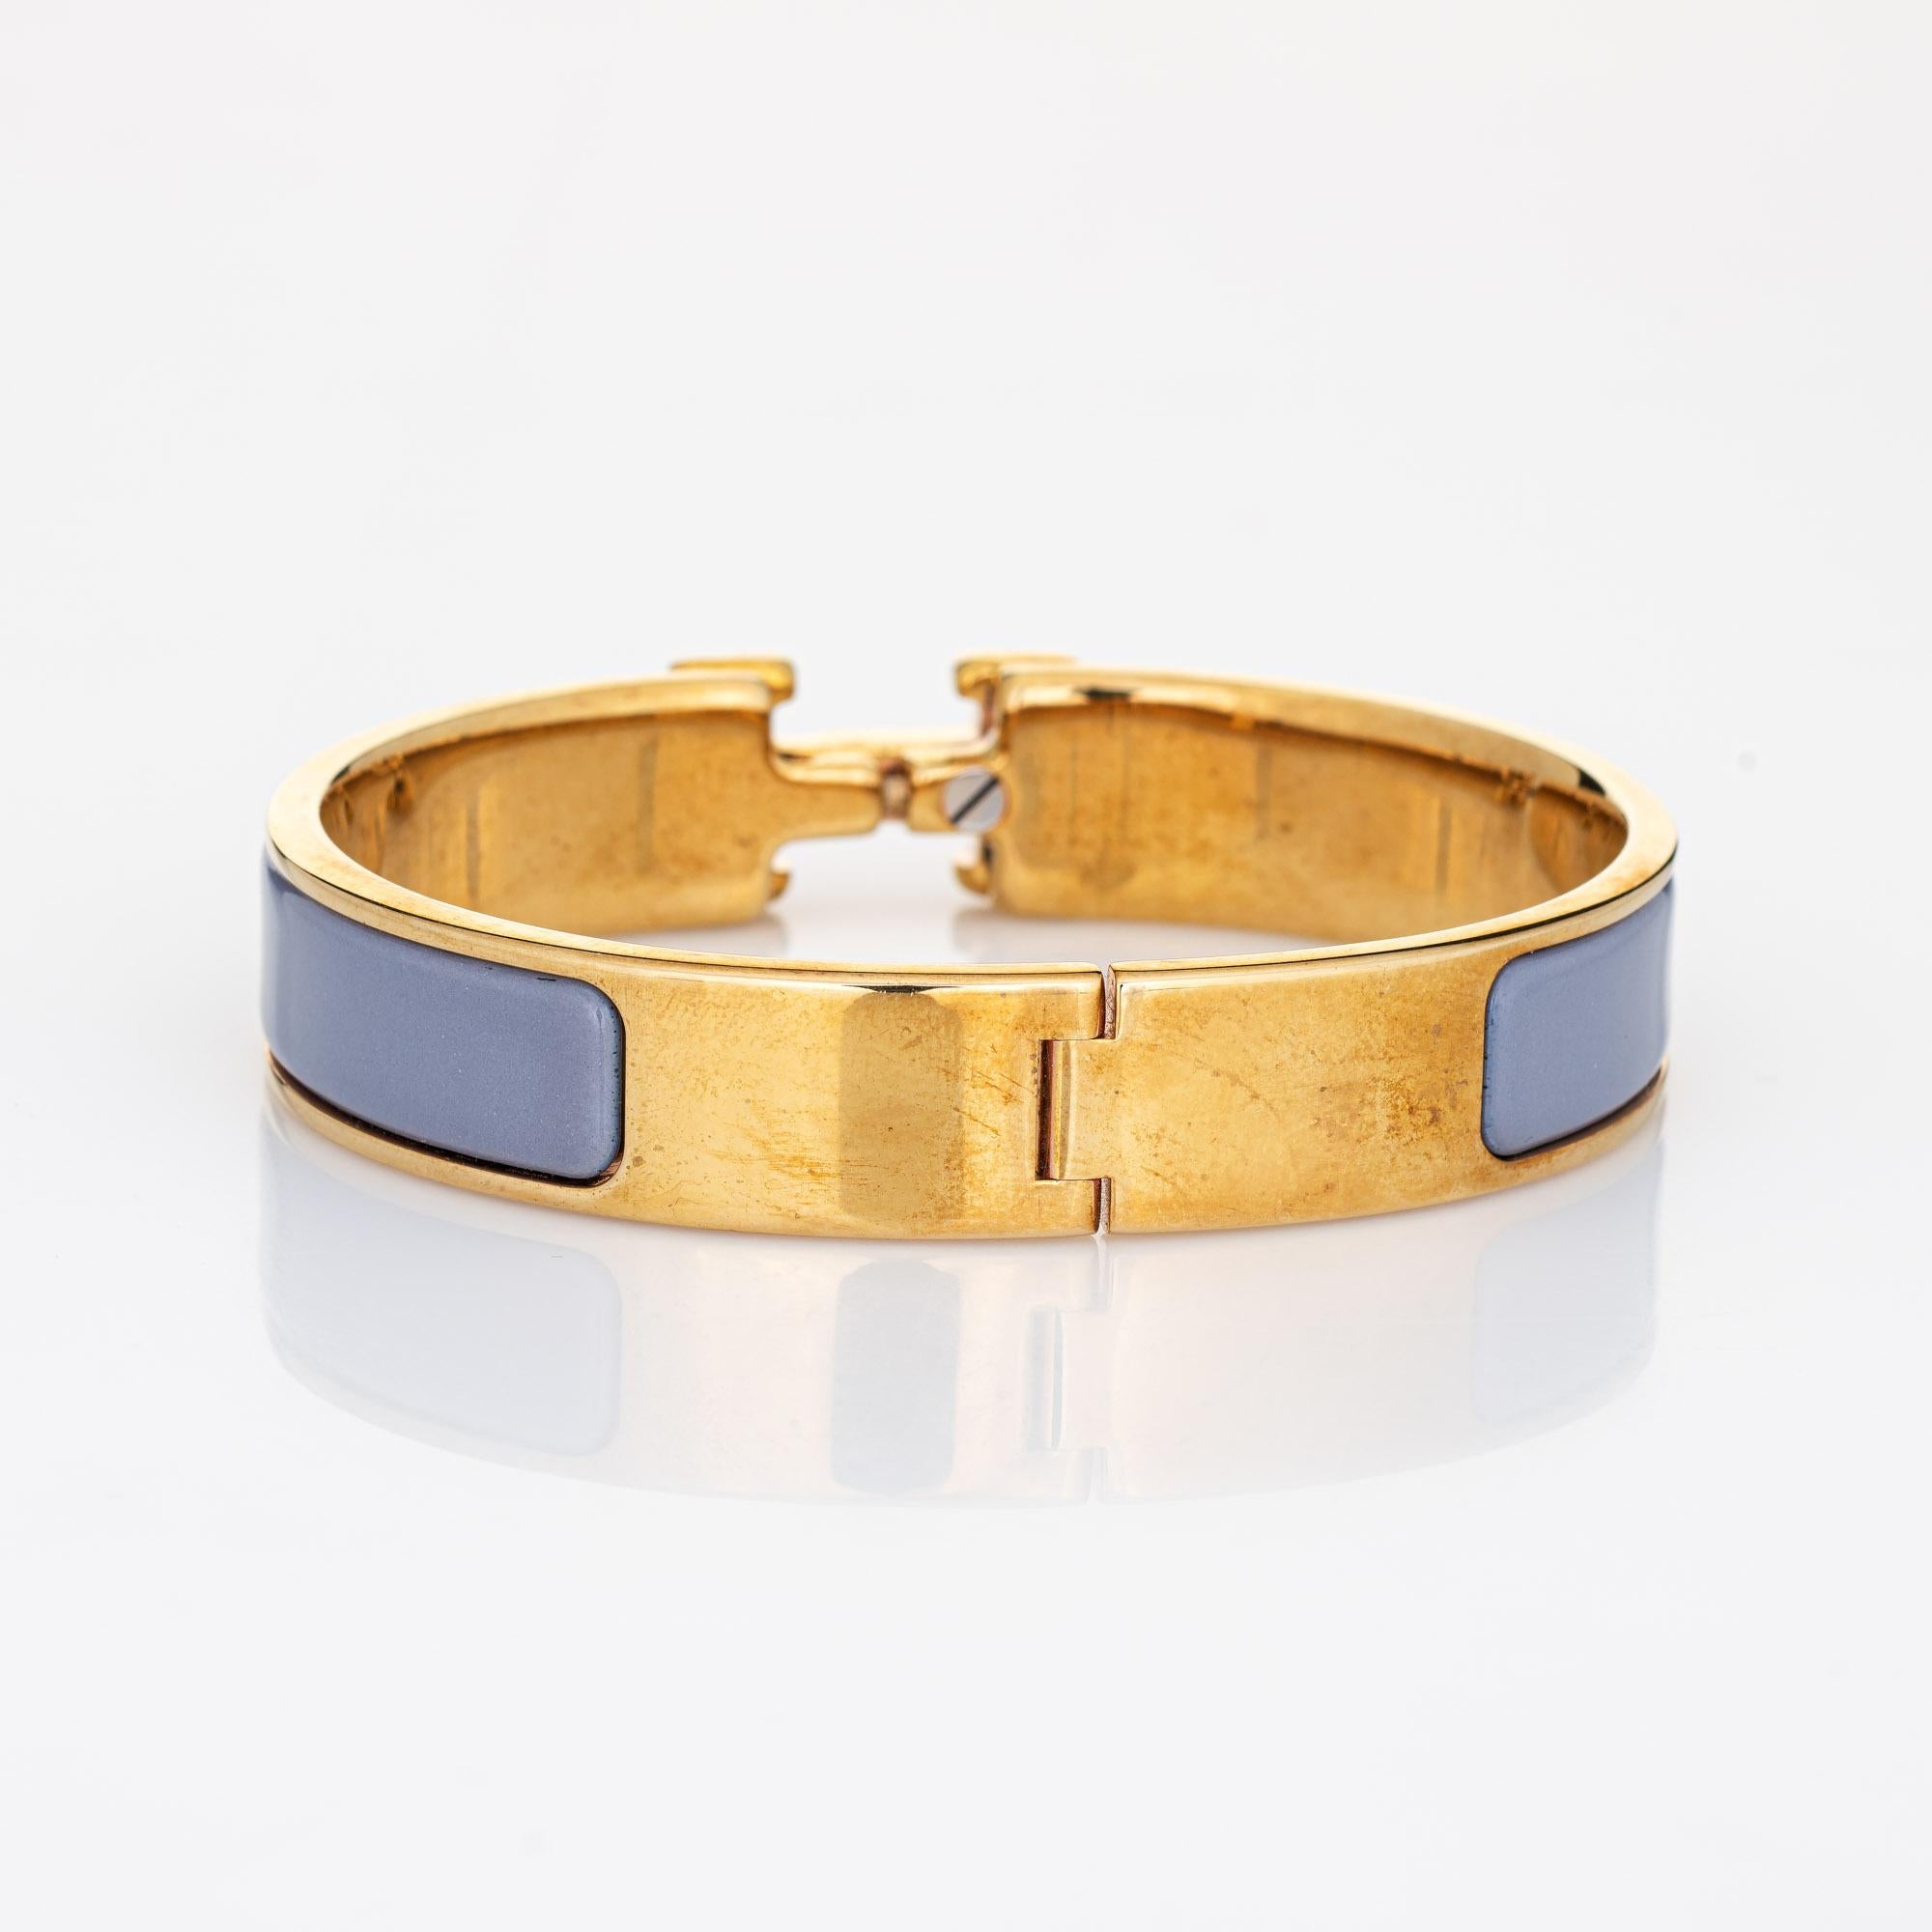 Pre-owned Hermes clic clac bracelet.

The narrow Hermes bracelet features purple mauve enamel detail and yellow gold plate. The H turnlock secures the bracelet onto the wrist. The bracelet is in good condition showing minimal wear to the enamel and